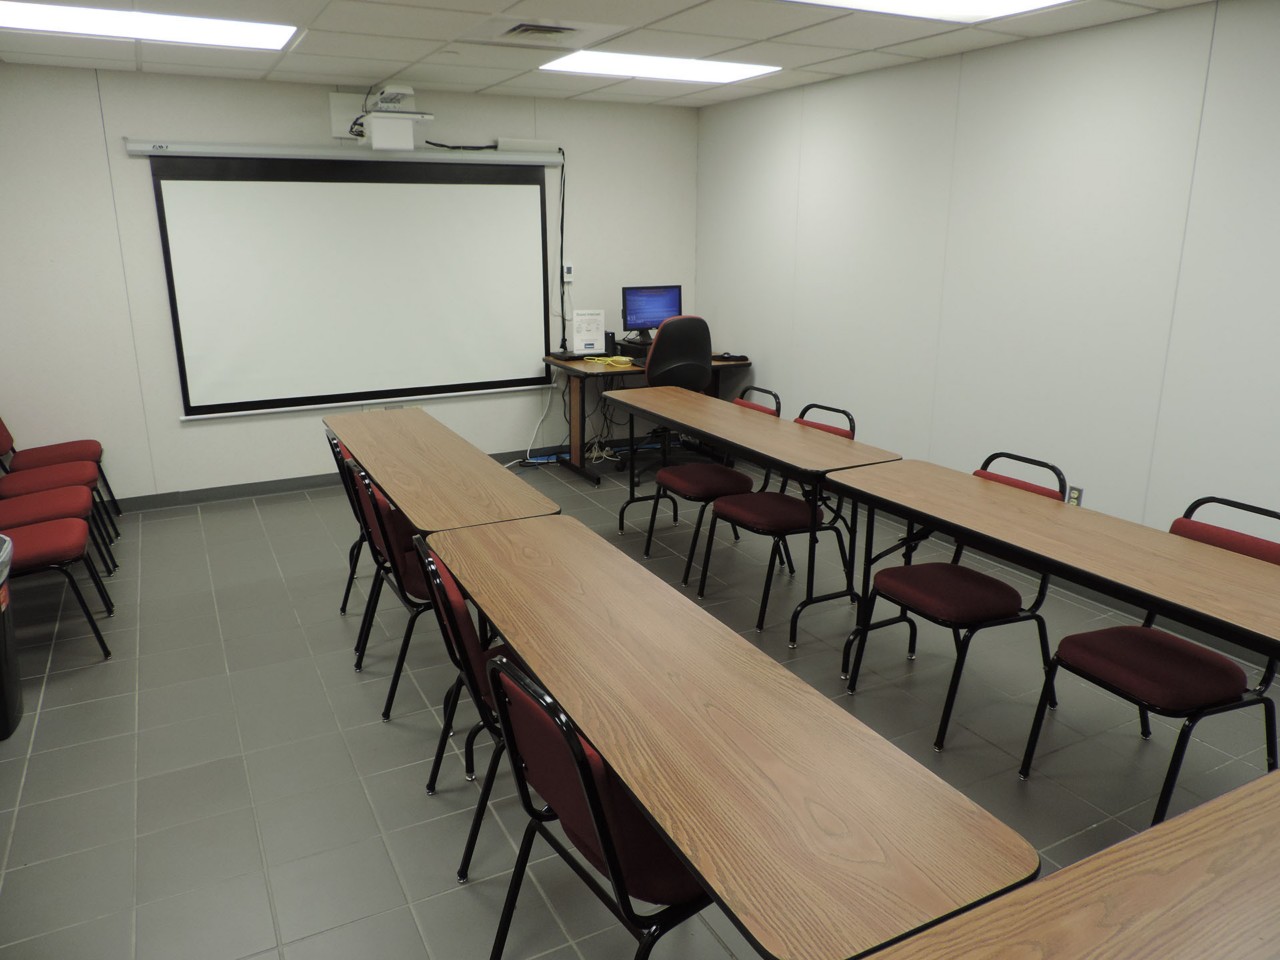 Conference or training room with available projector, white/smart board, and tables/chairs.